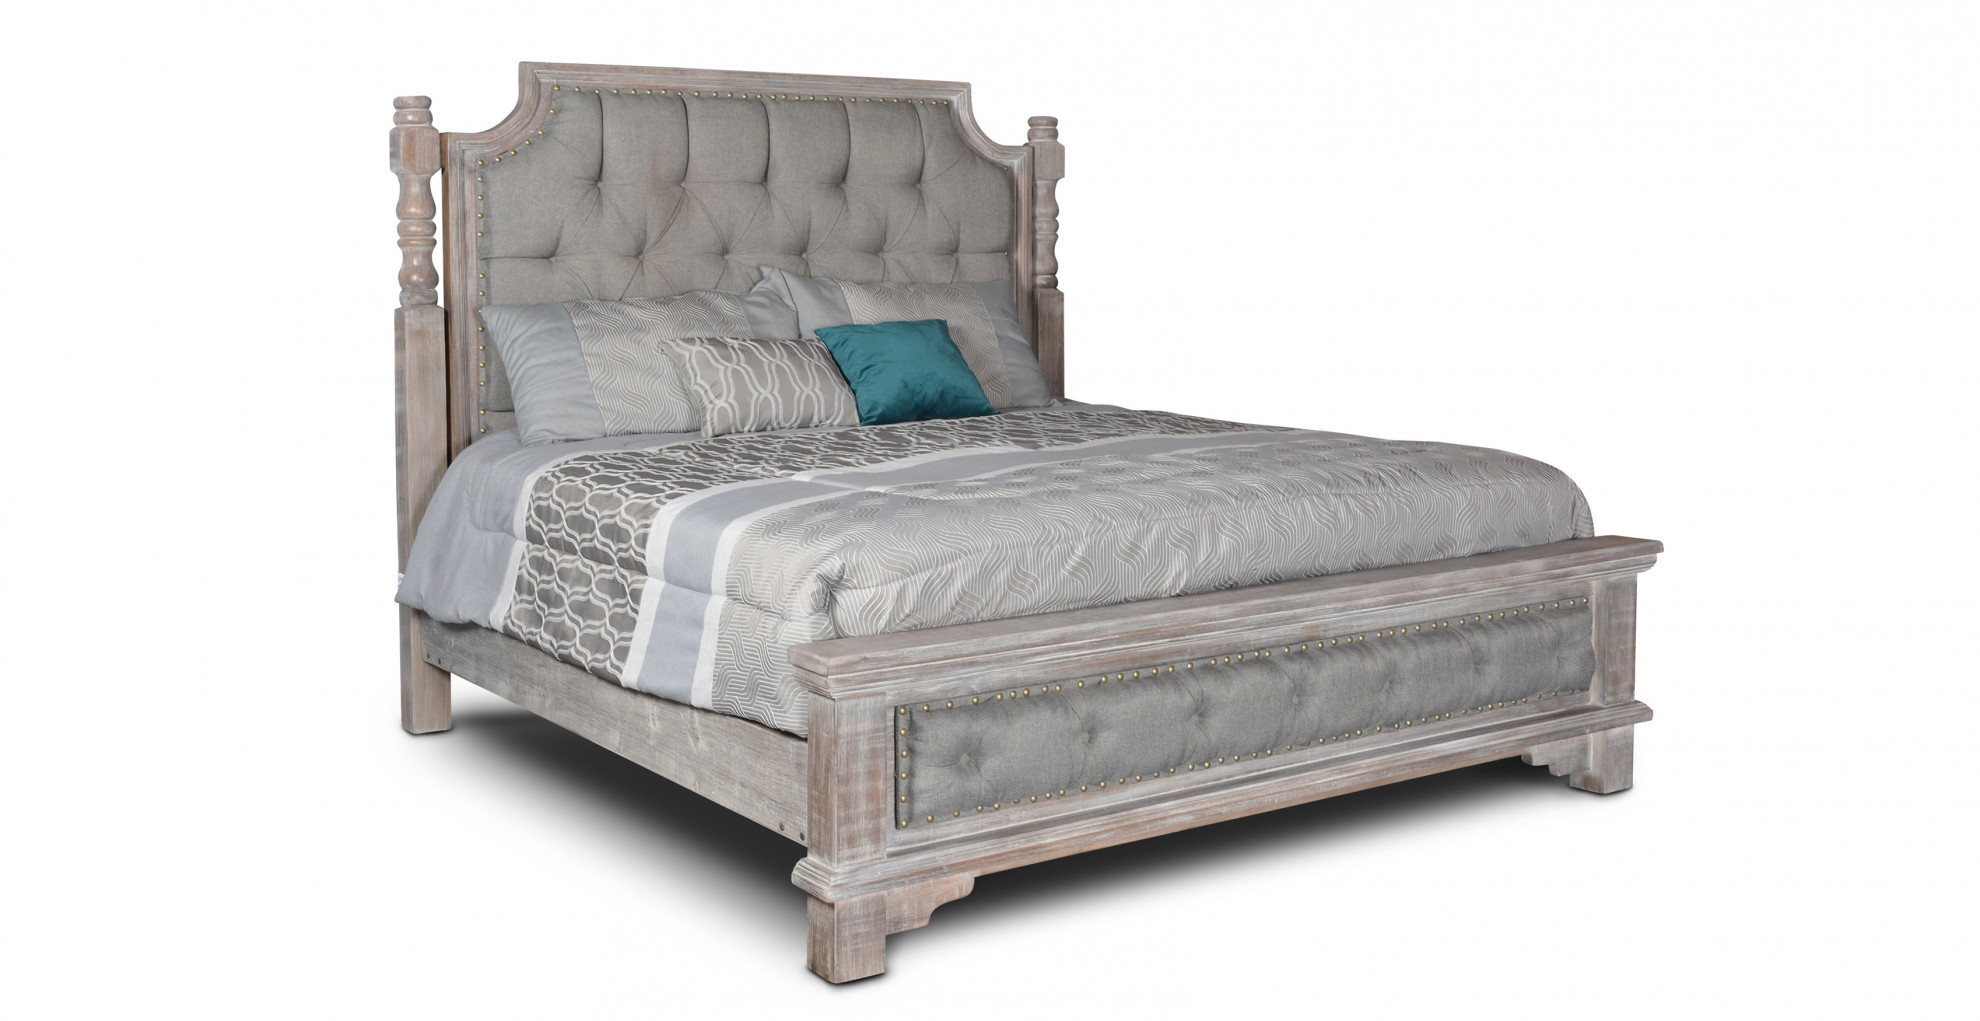 H4035-bed